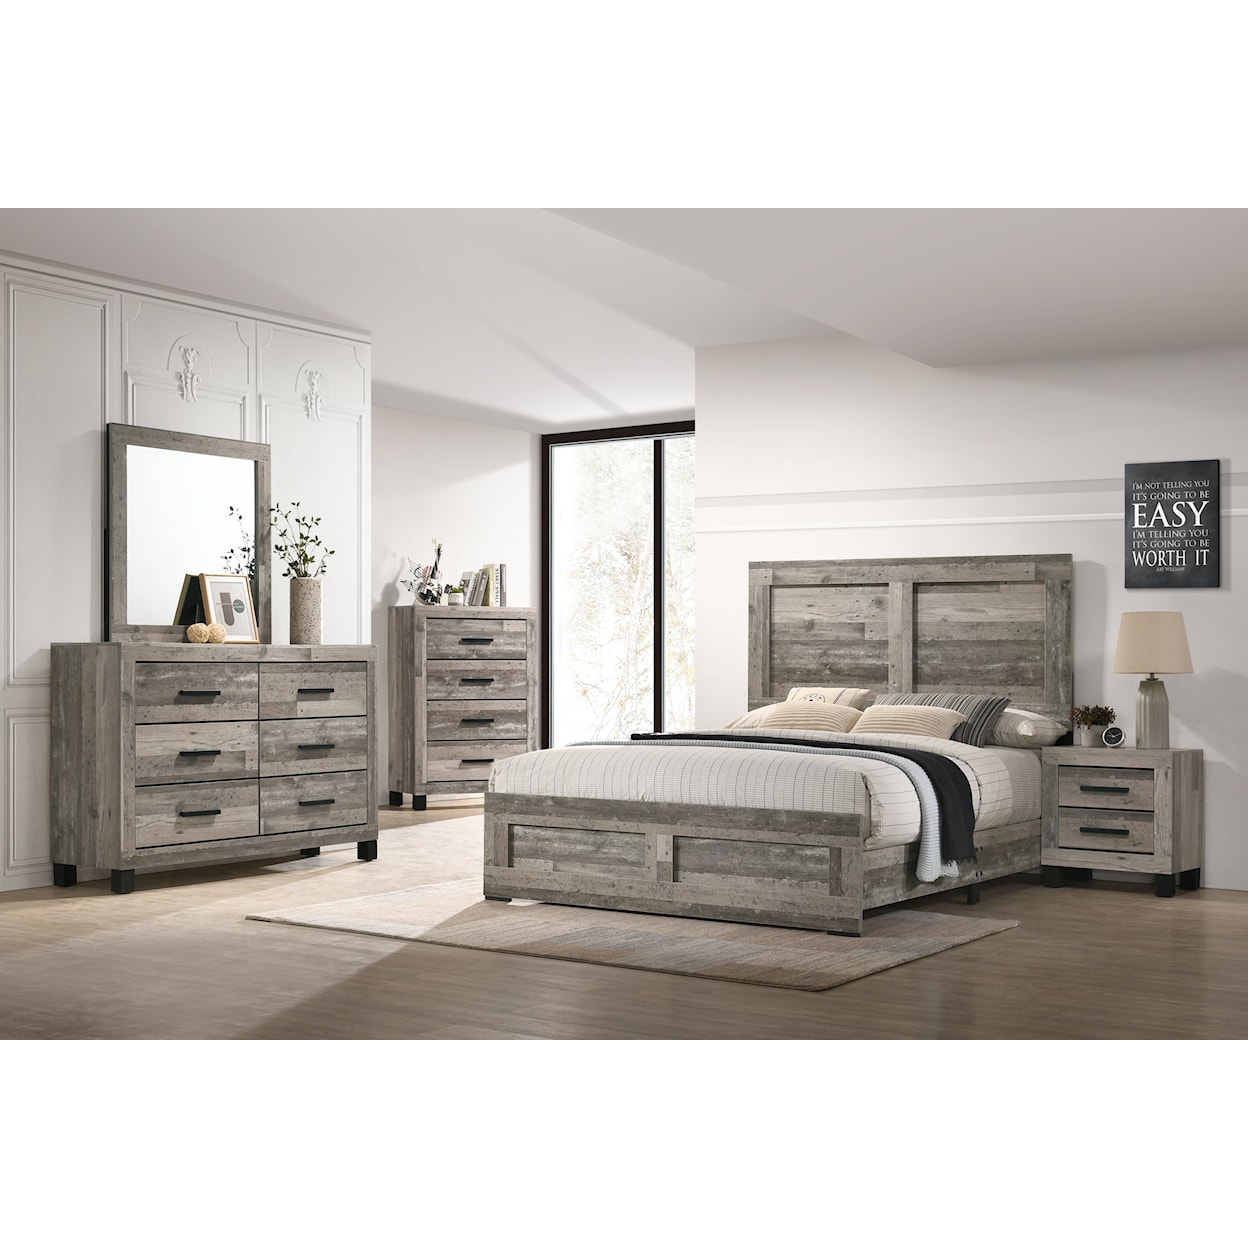 Lifestyle Natural NATURAL GREY 4 PC QUEEN BEDROOM |